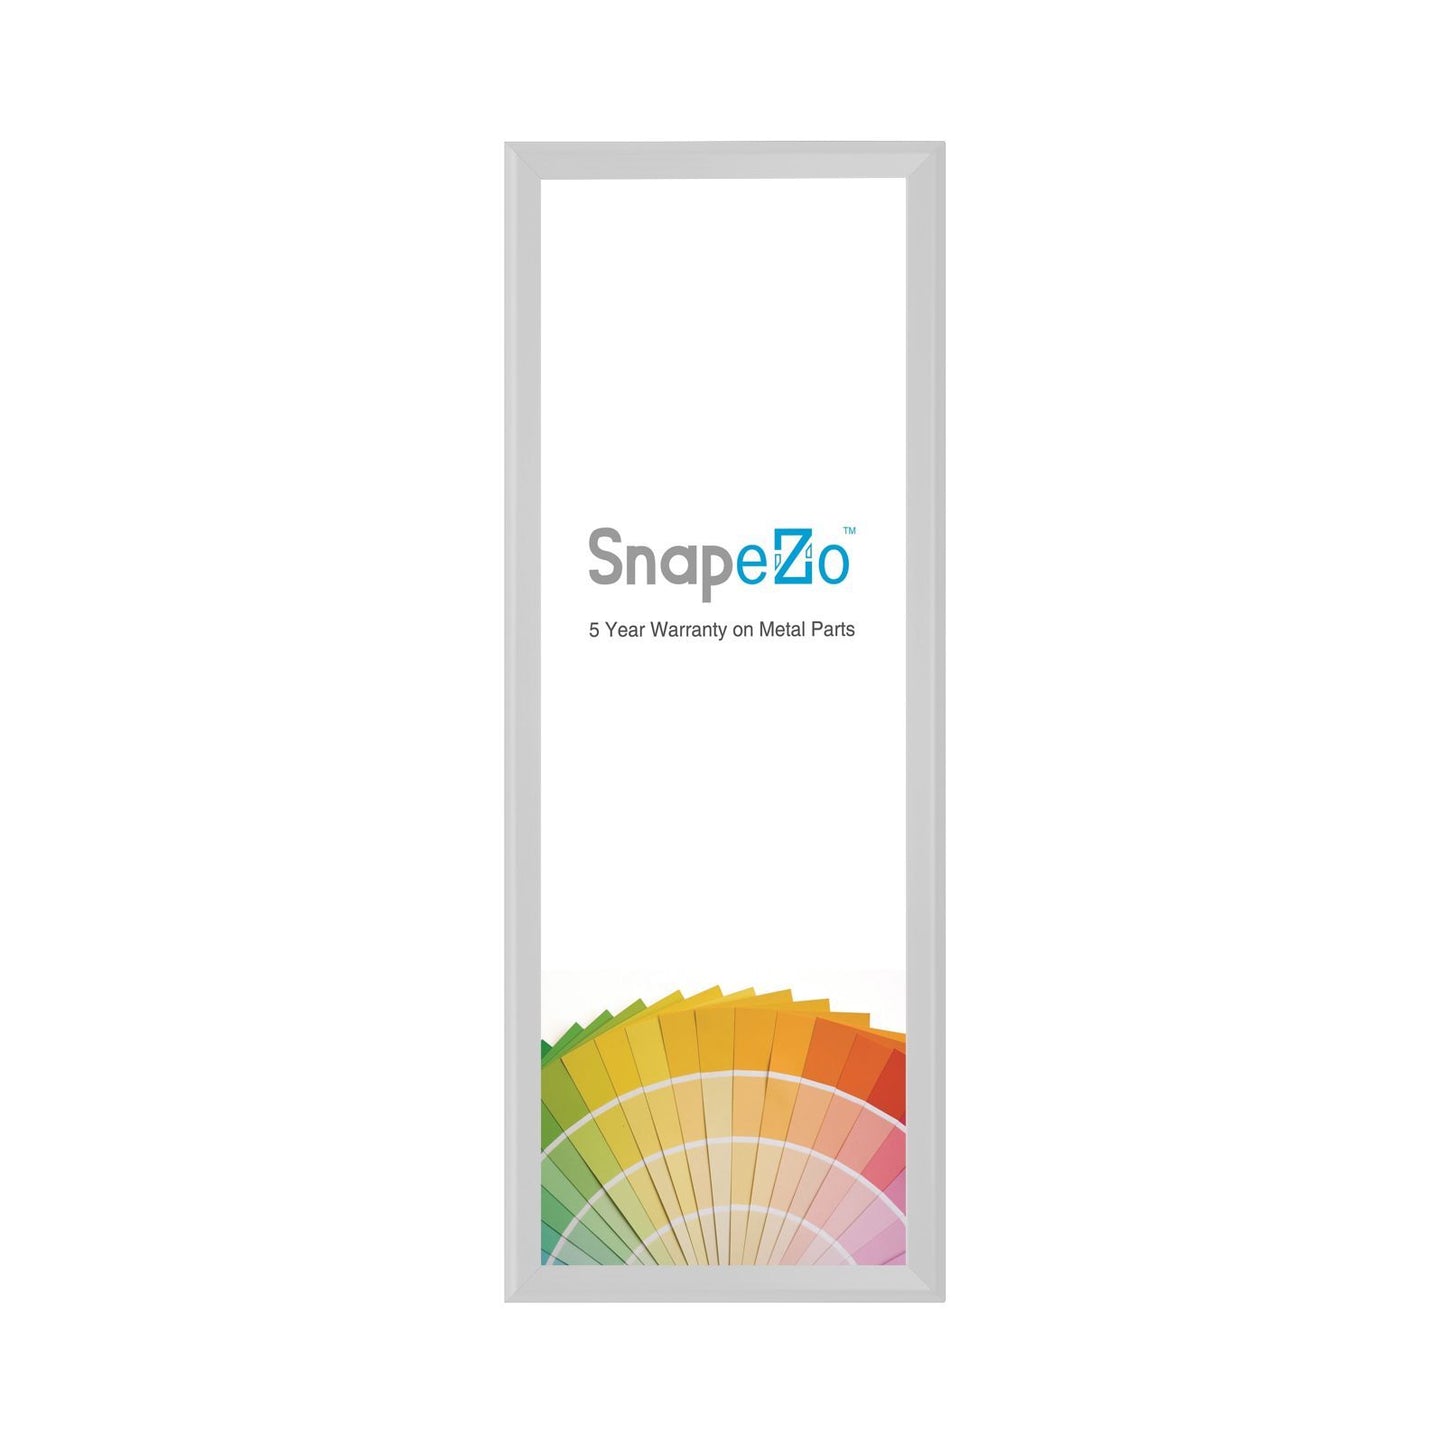 Load image into Gallery viewer, 22x56 Silver SnapeZo® Snap Frame - 1.25 Inch Profile
